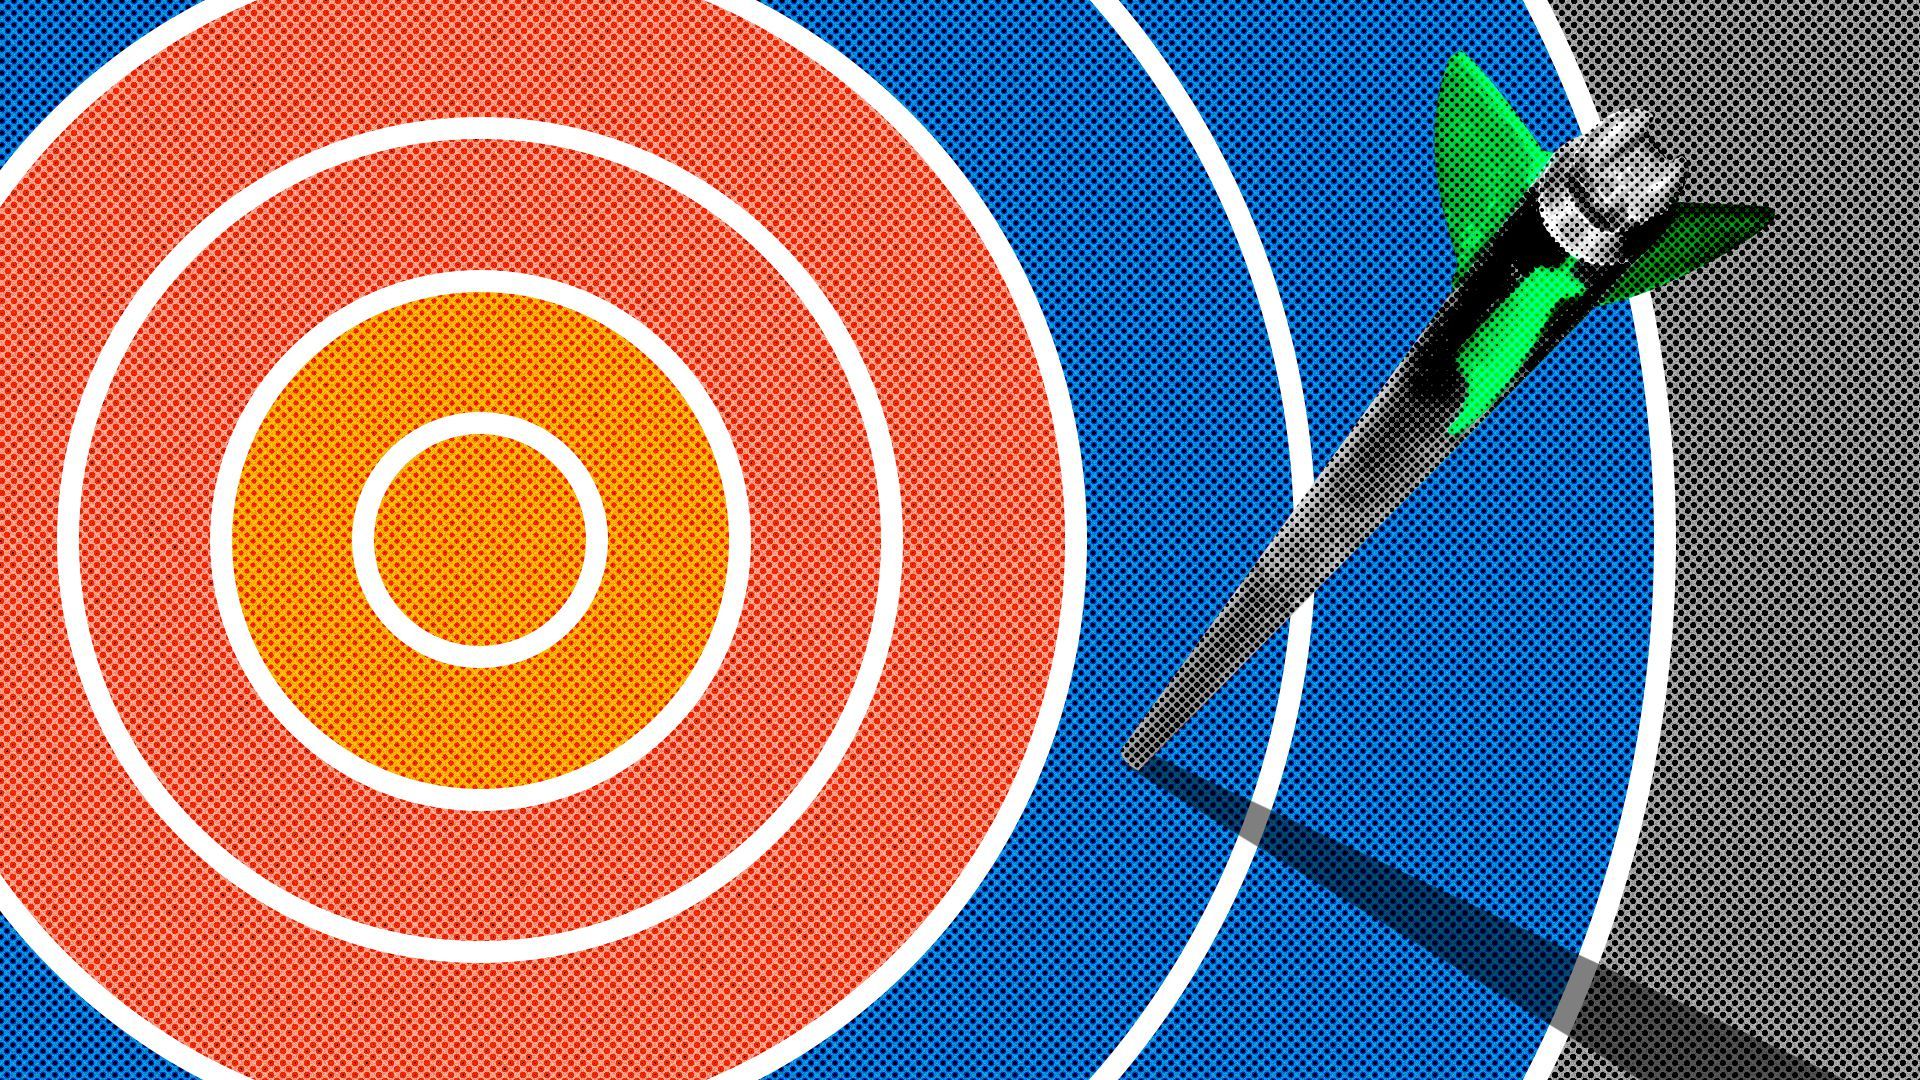 Illustration of an archery arrow that has missed the bullseye on the target.